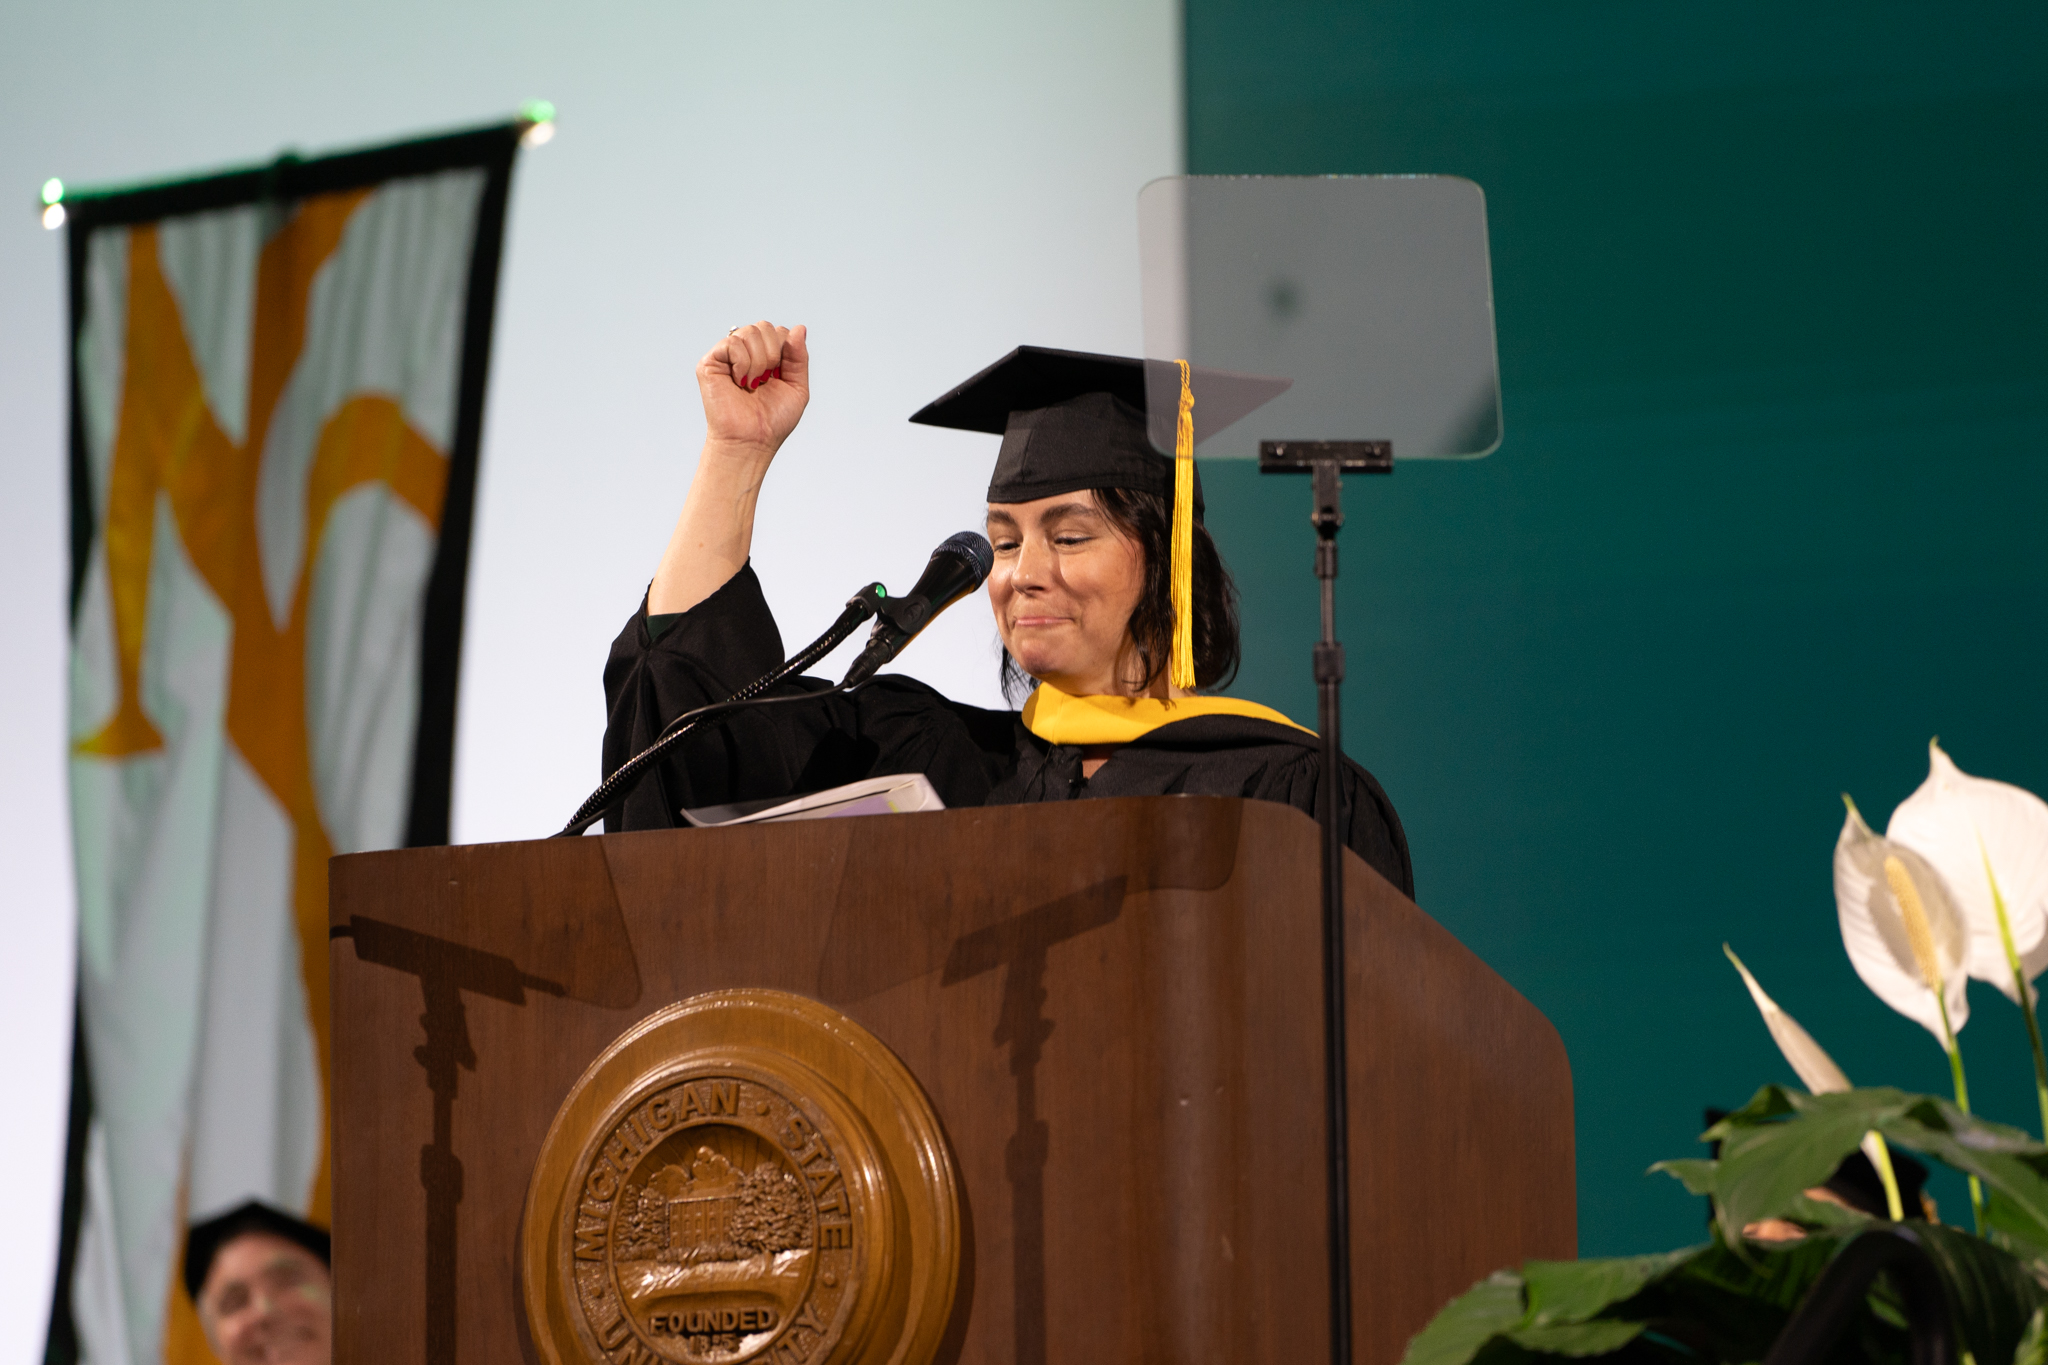 Martin yells 'go green' during the College of Natural Science commencement